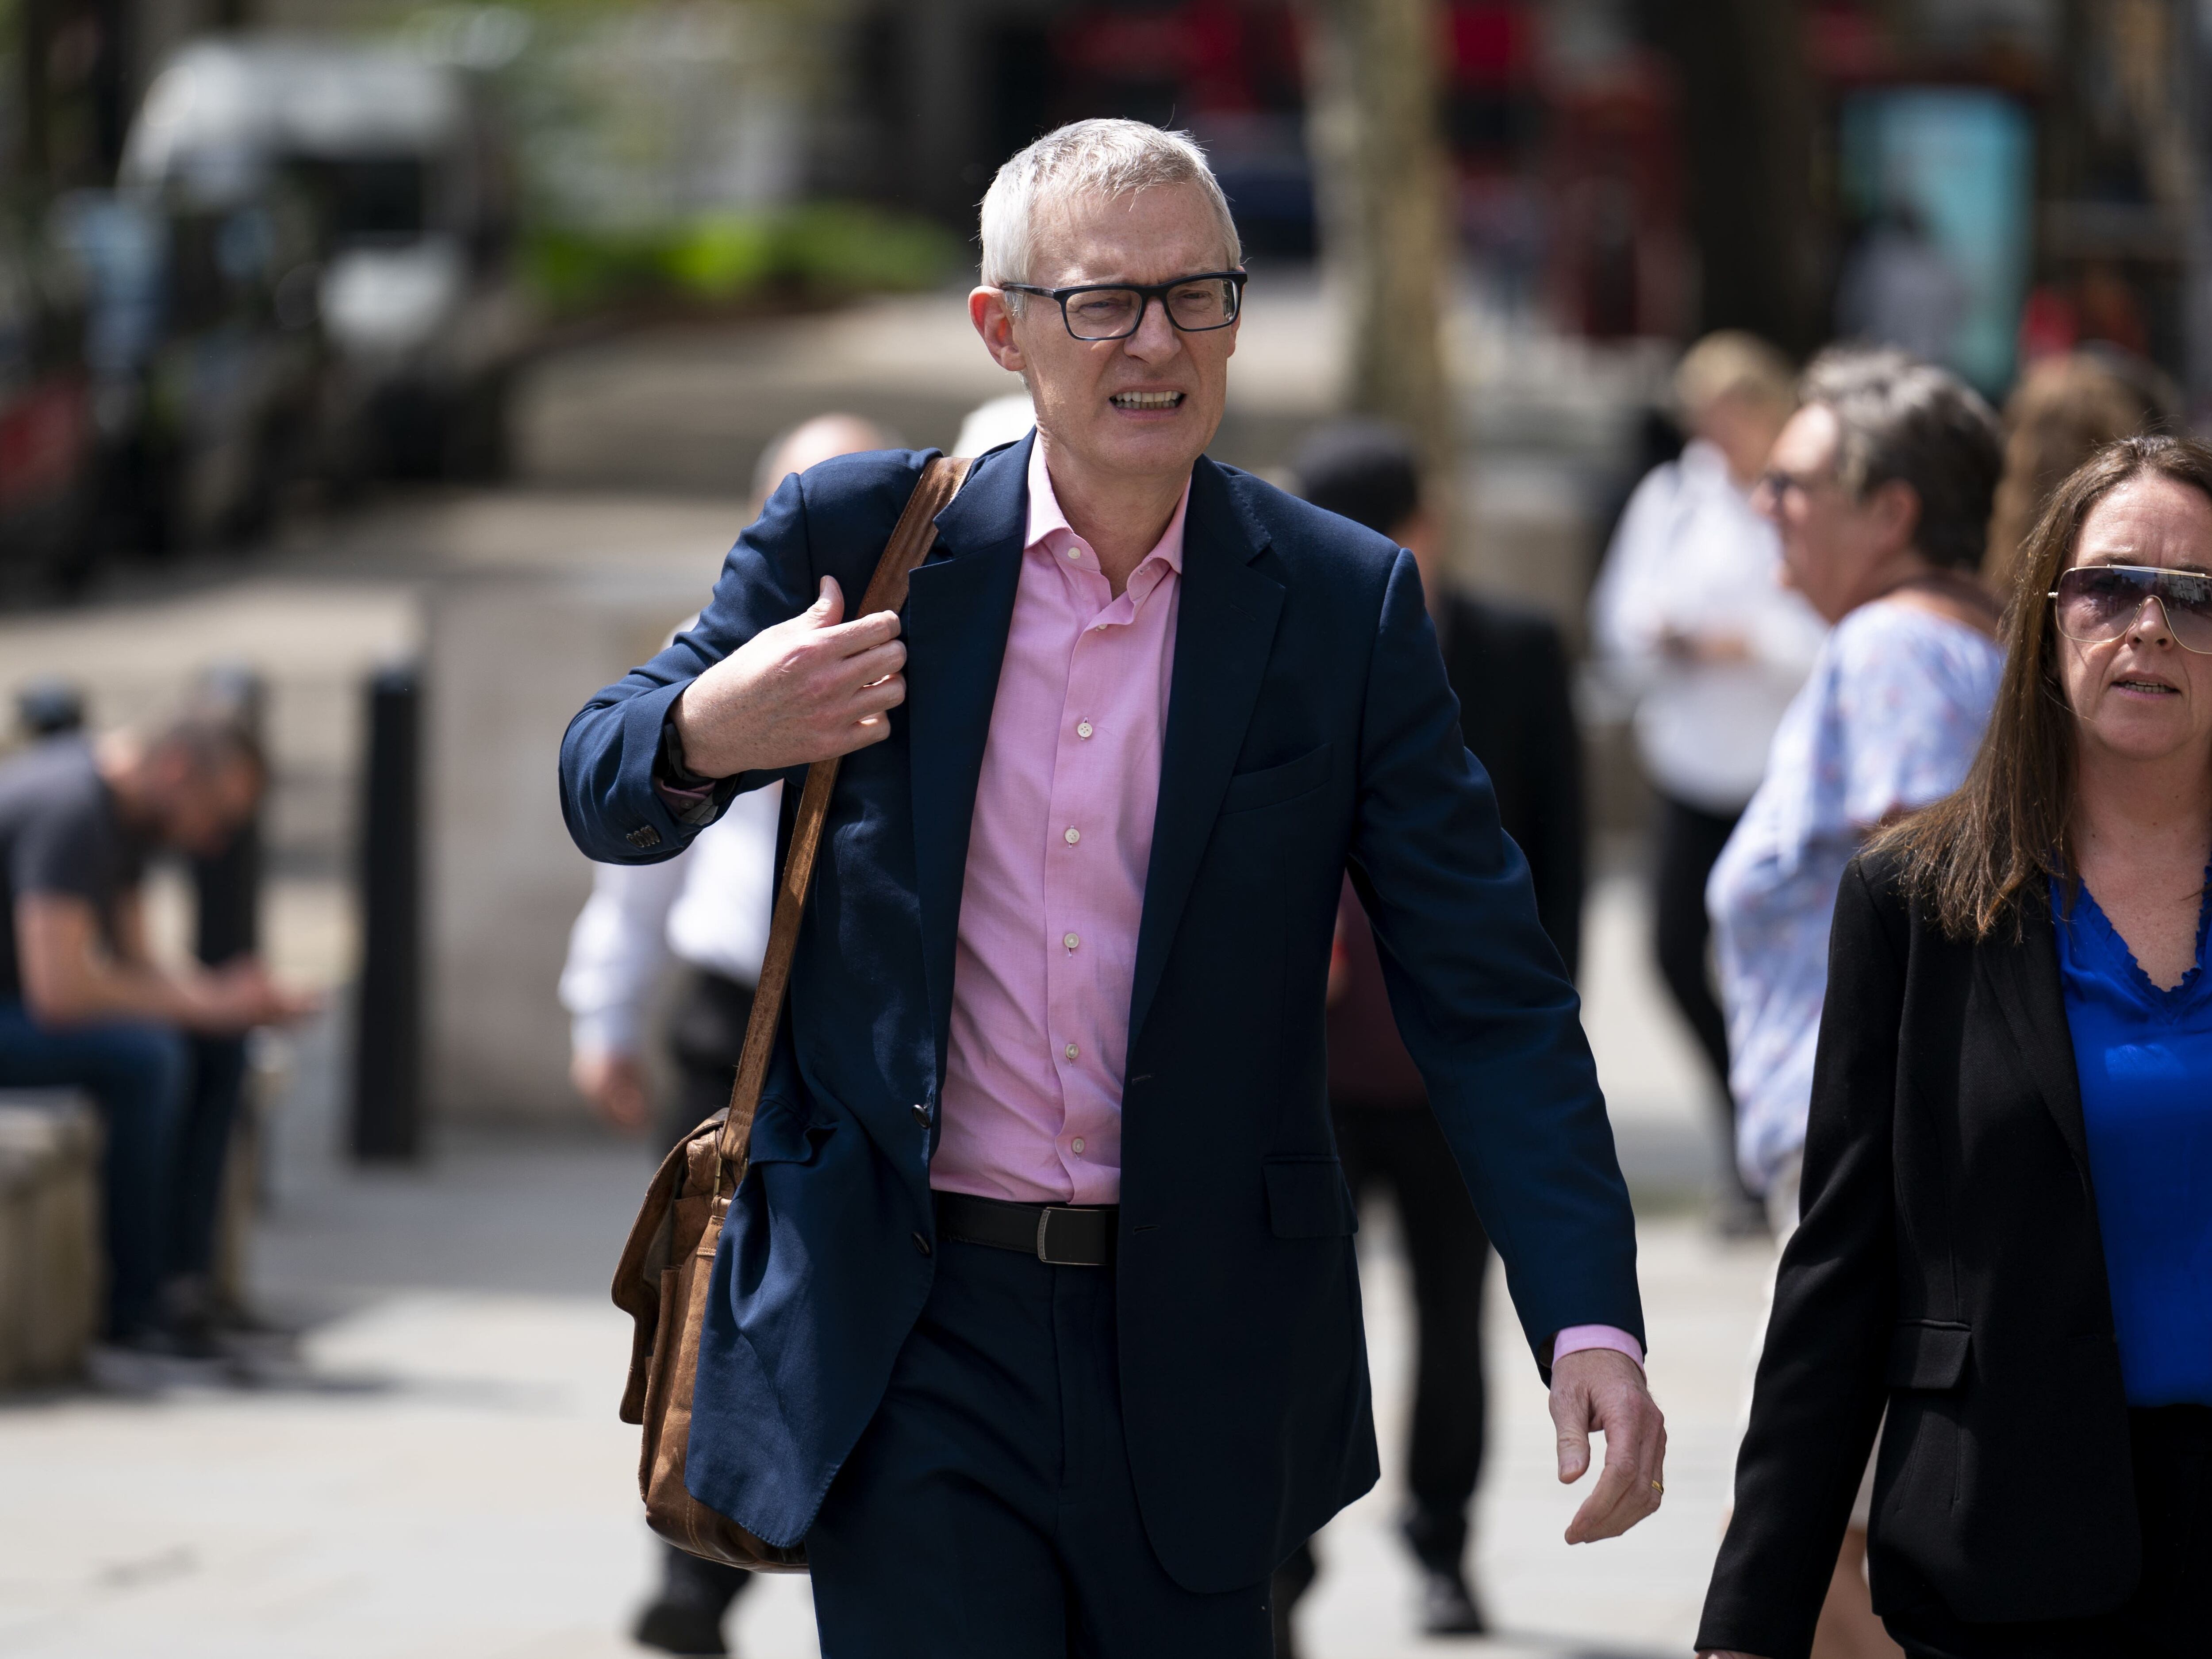 Barton apology and damages ‘not final outcome’ of libel case, says Jeremy Vine